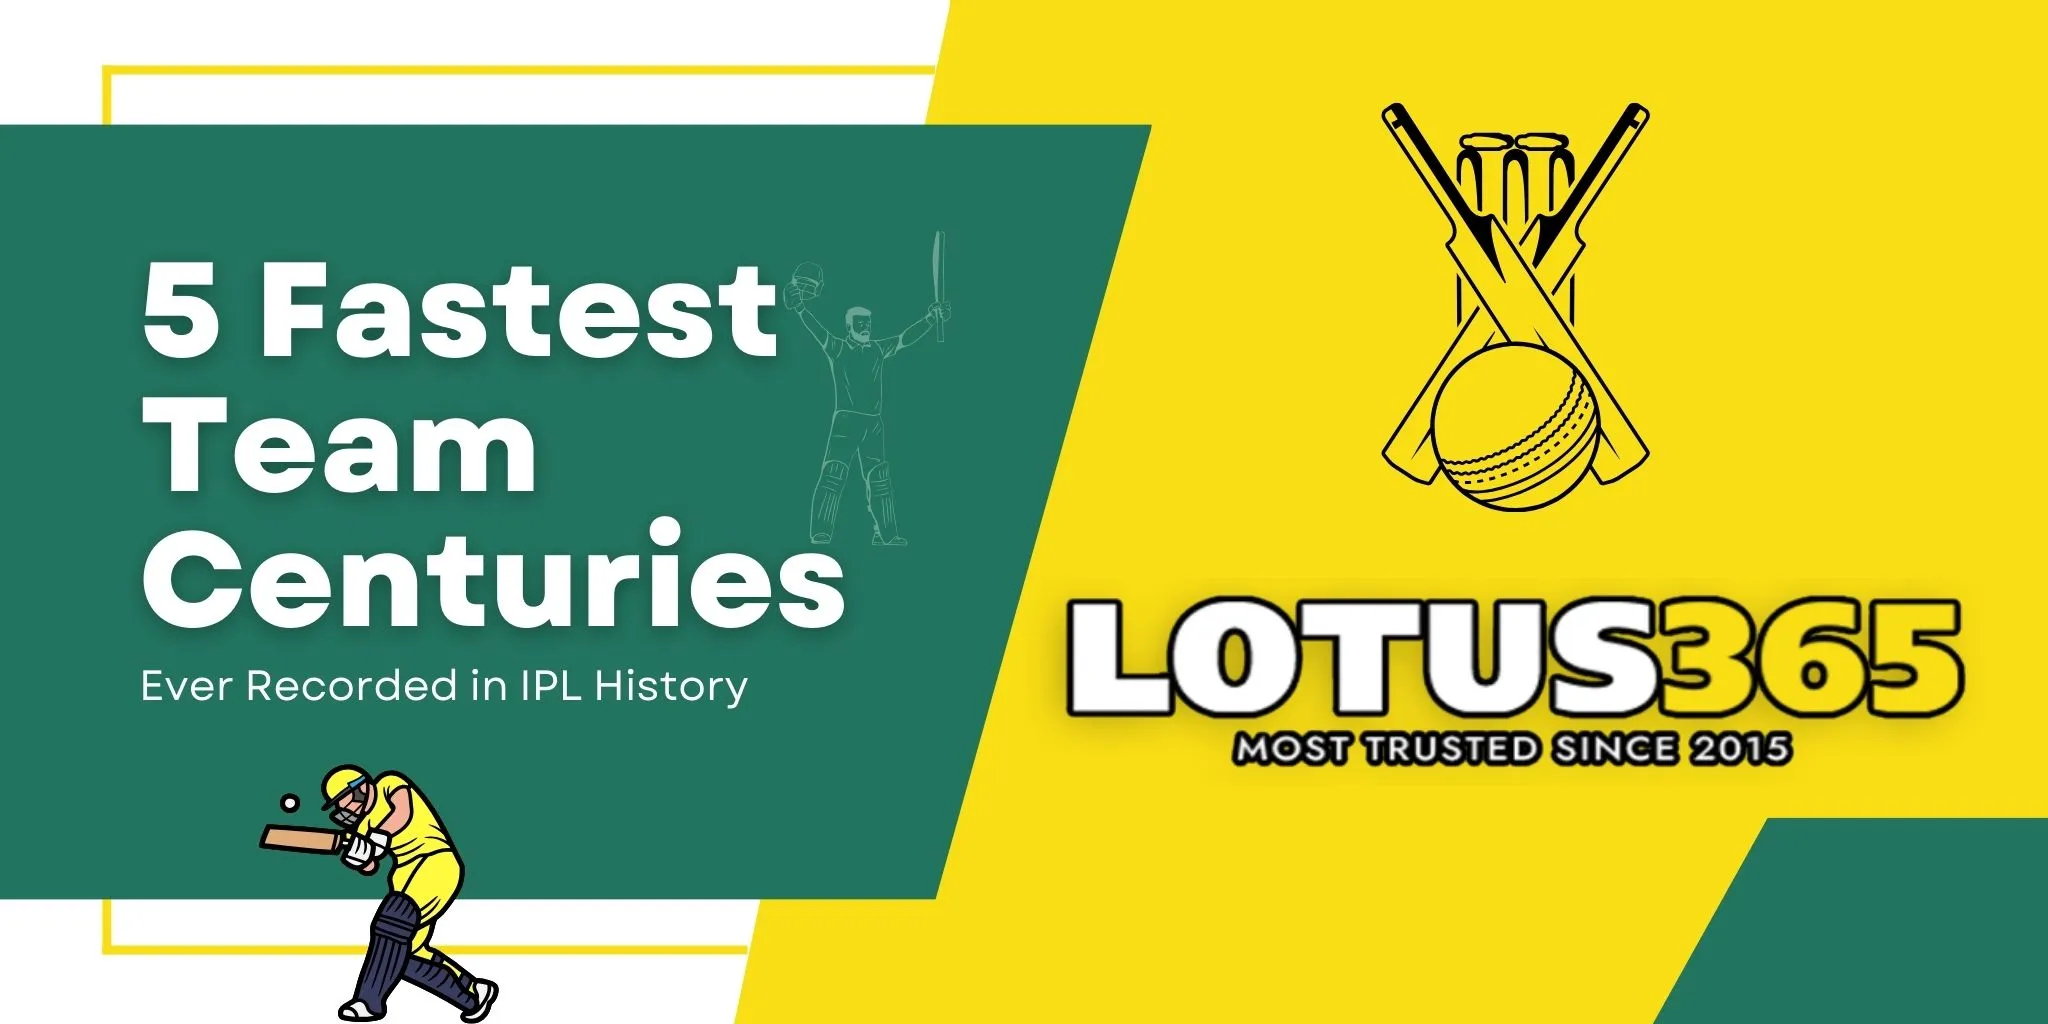 5 Fastest Team Centuries Ever Recorded in IPL History
